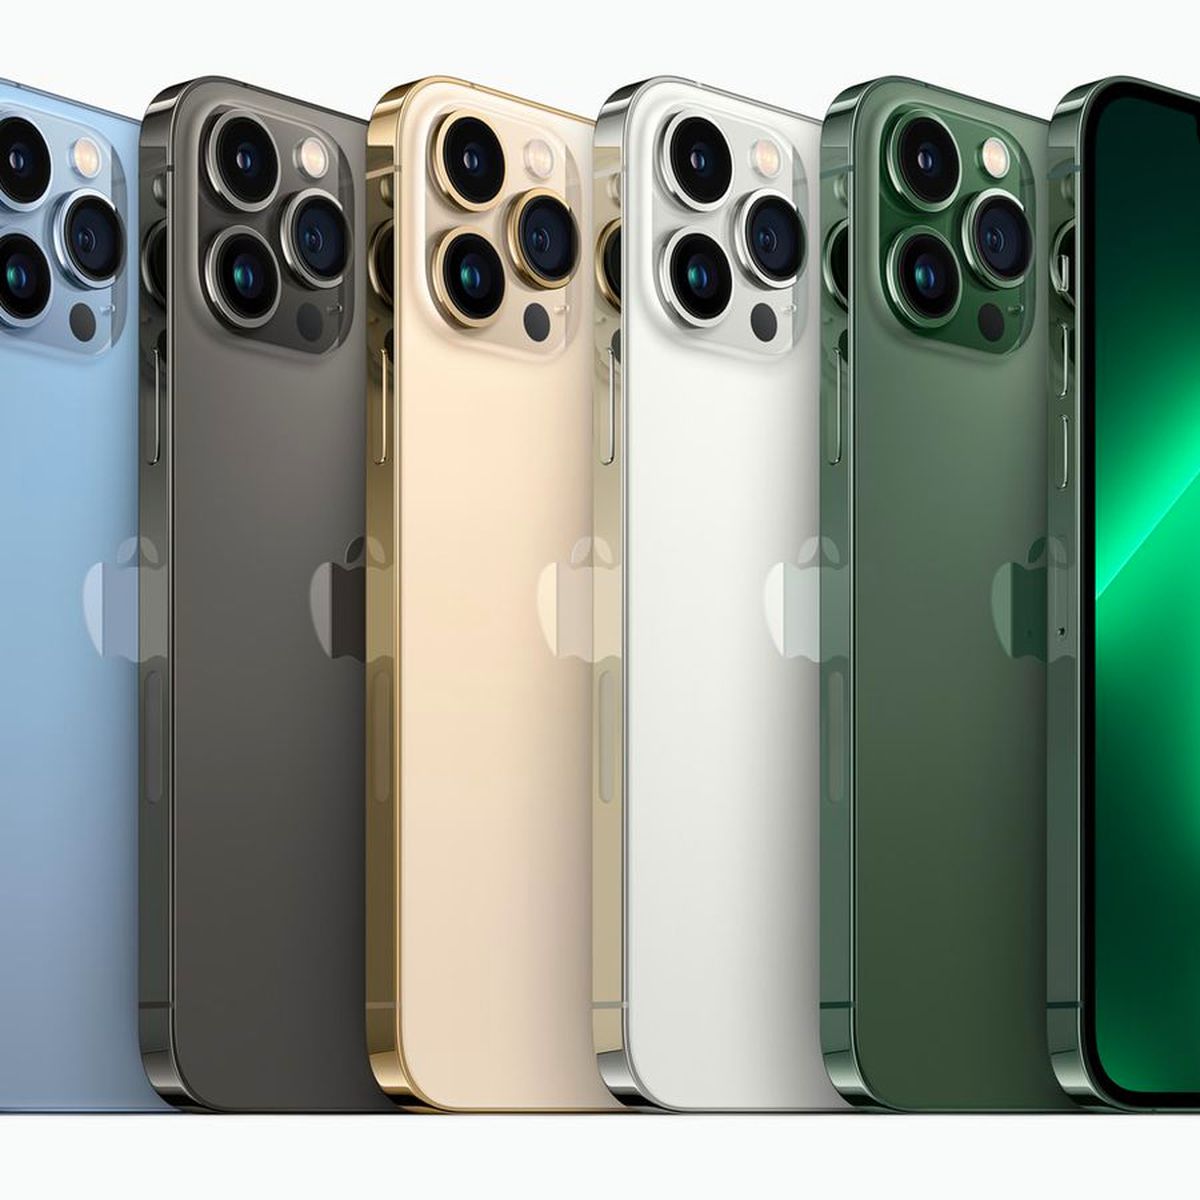 Apple Begins Selling Refurbished iPhone 12 and iPhone 12 Pro